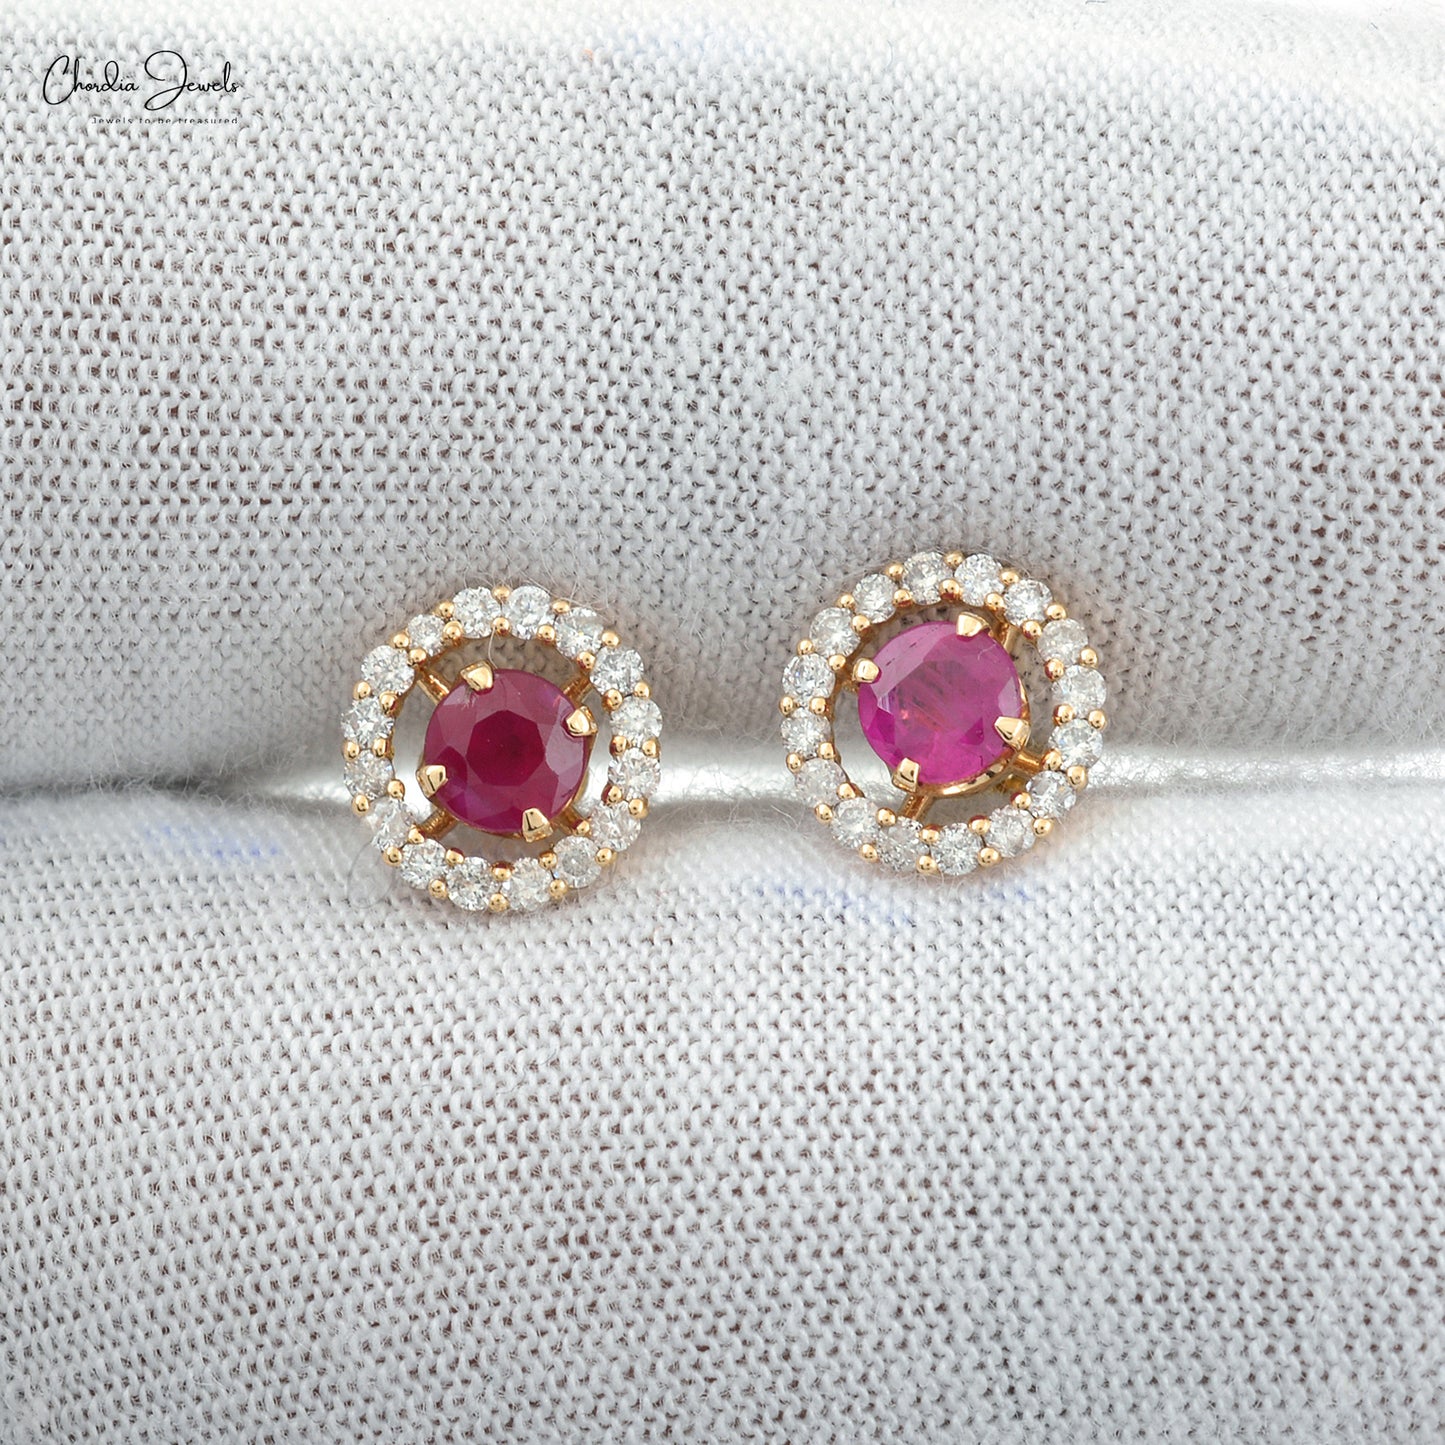 Load image into Gallery viewer, Natural Burma Ruby Handmade Halo Studs Earring in 14k Yellow Gold
